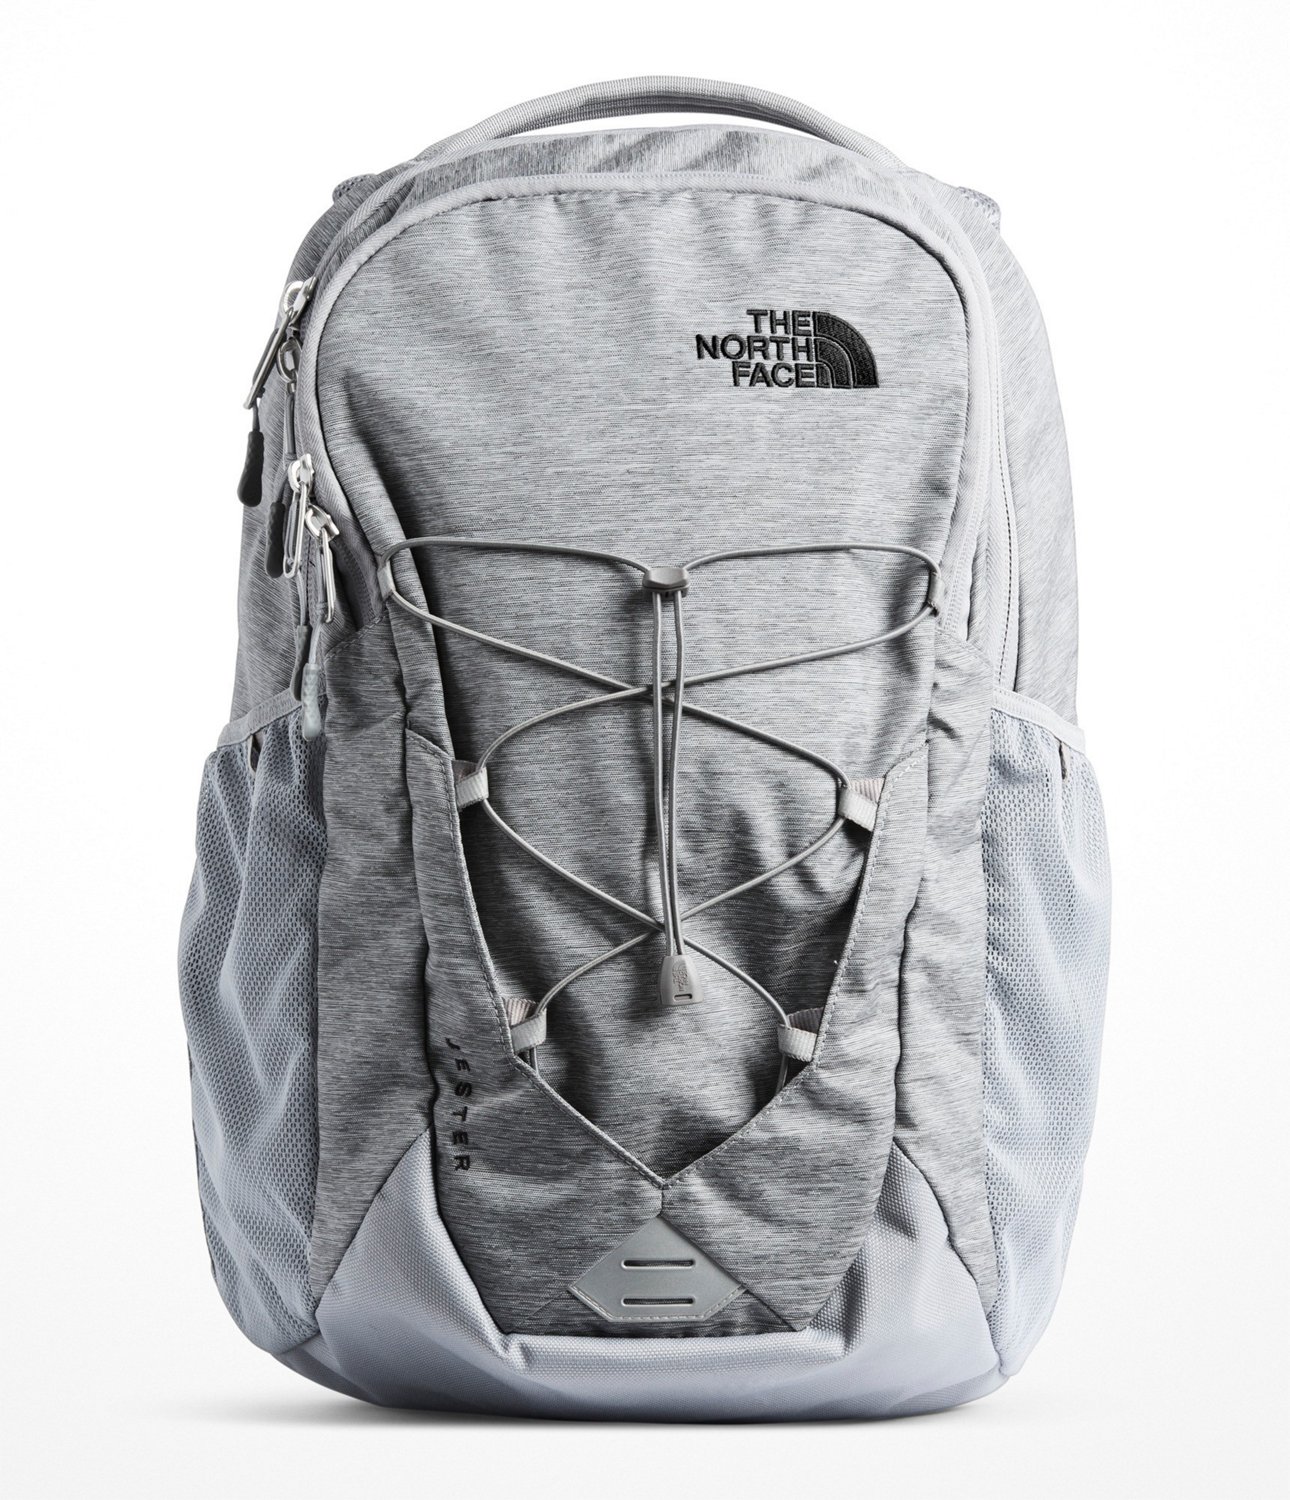 north face backpack academy